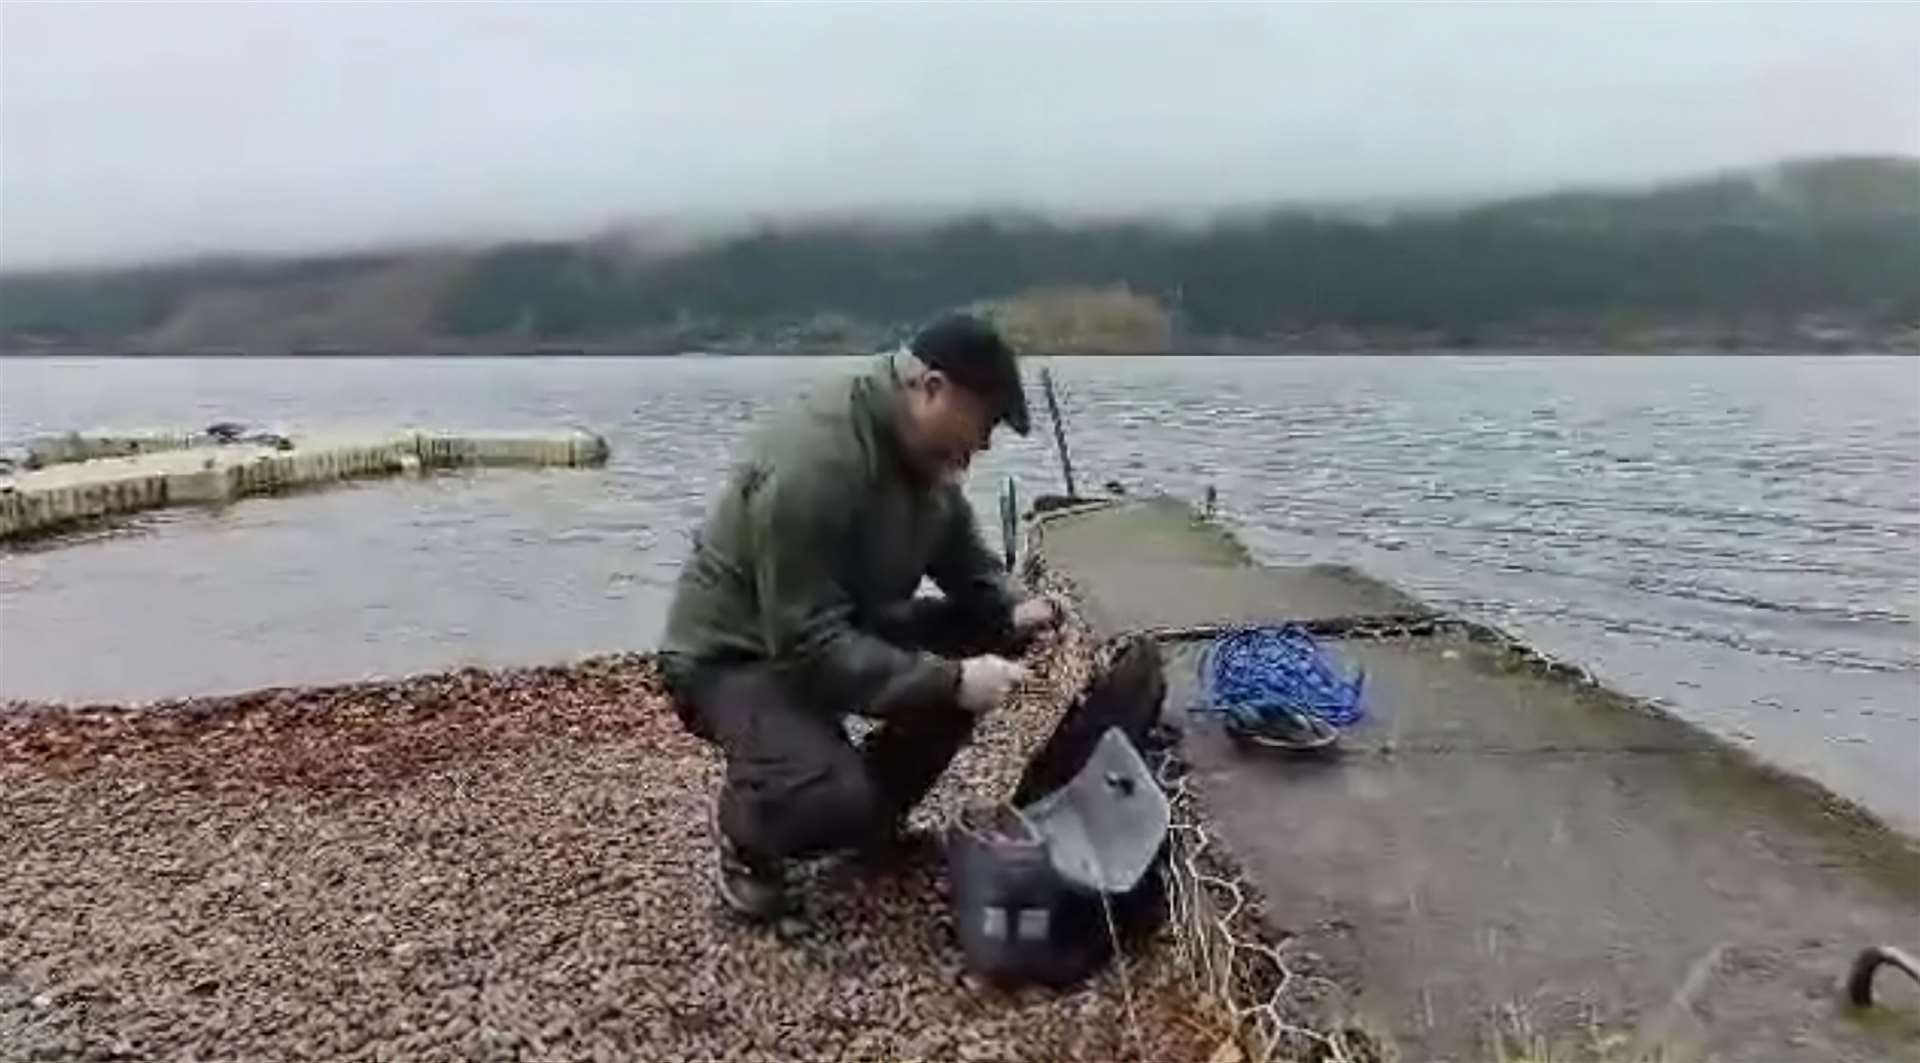 Setting up the hydrophone on Loch Ness.